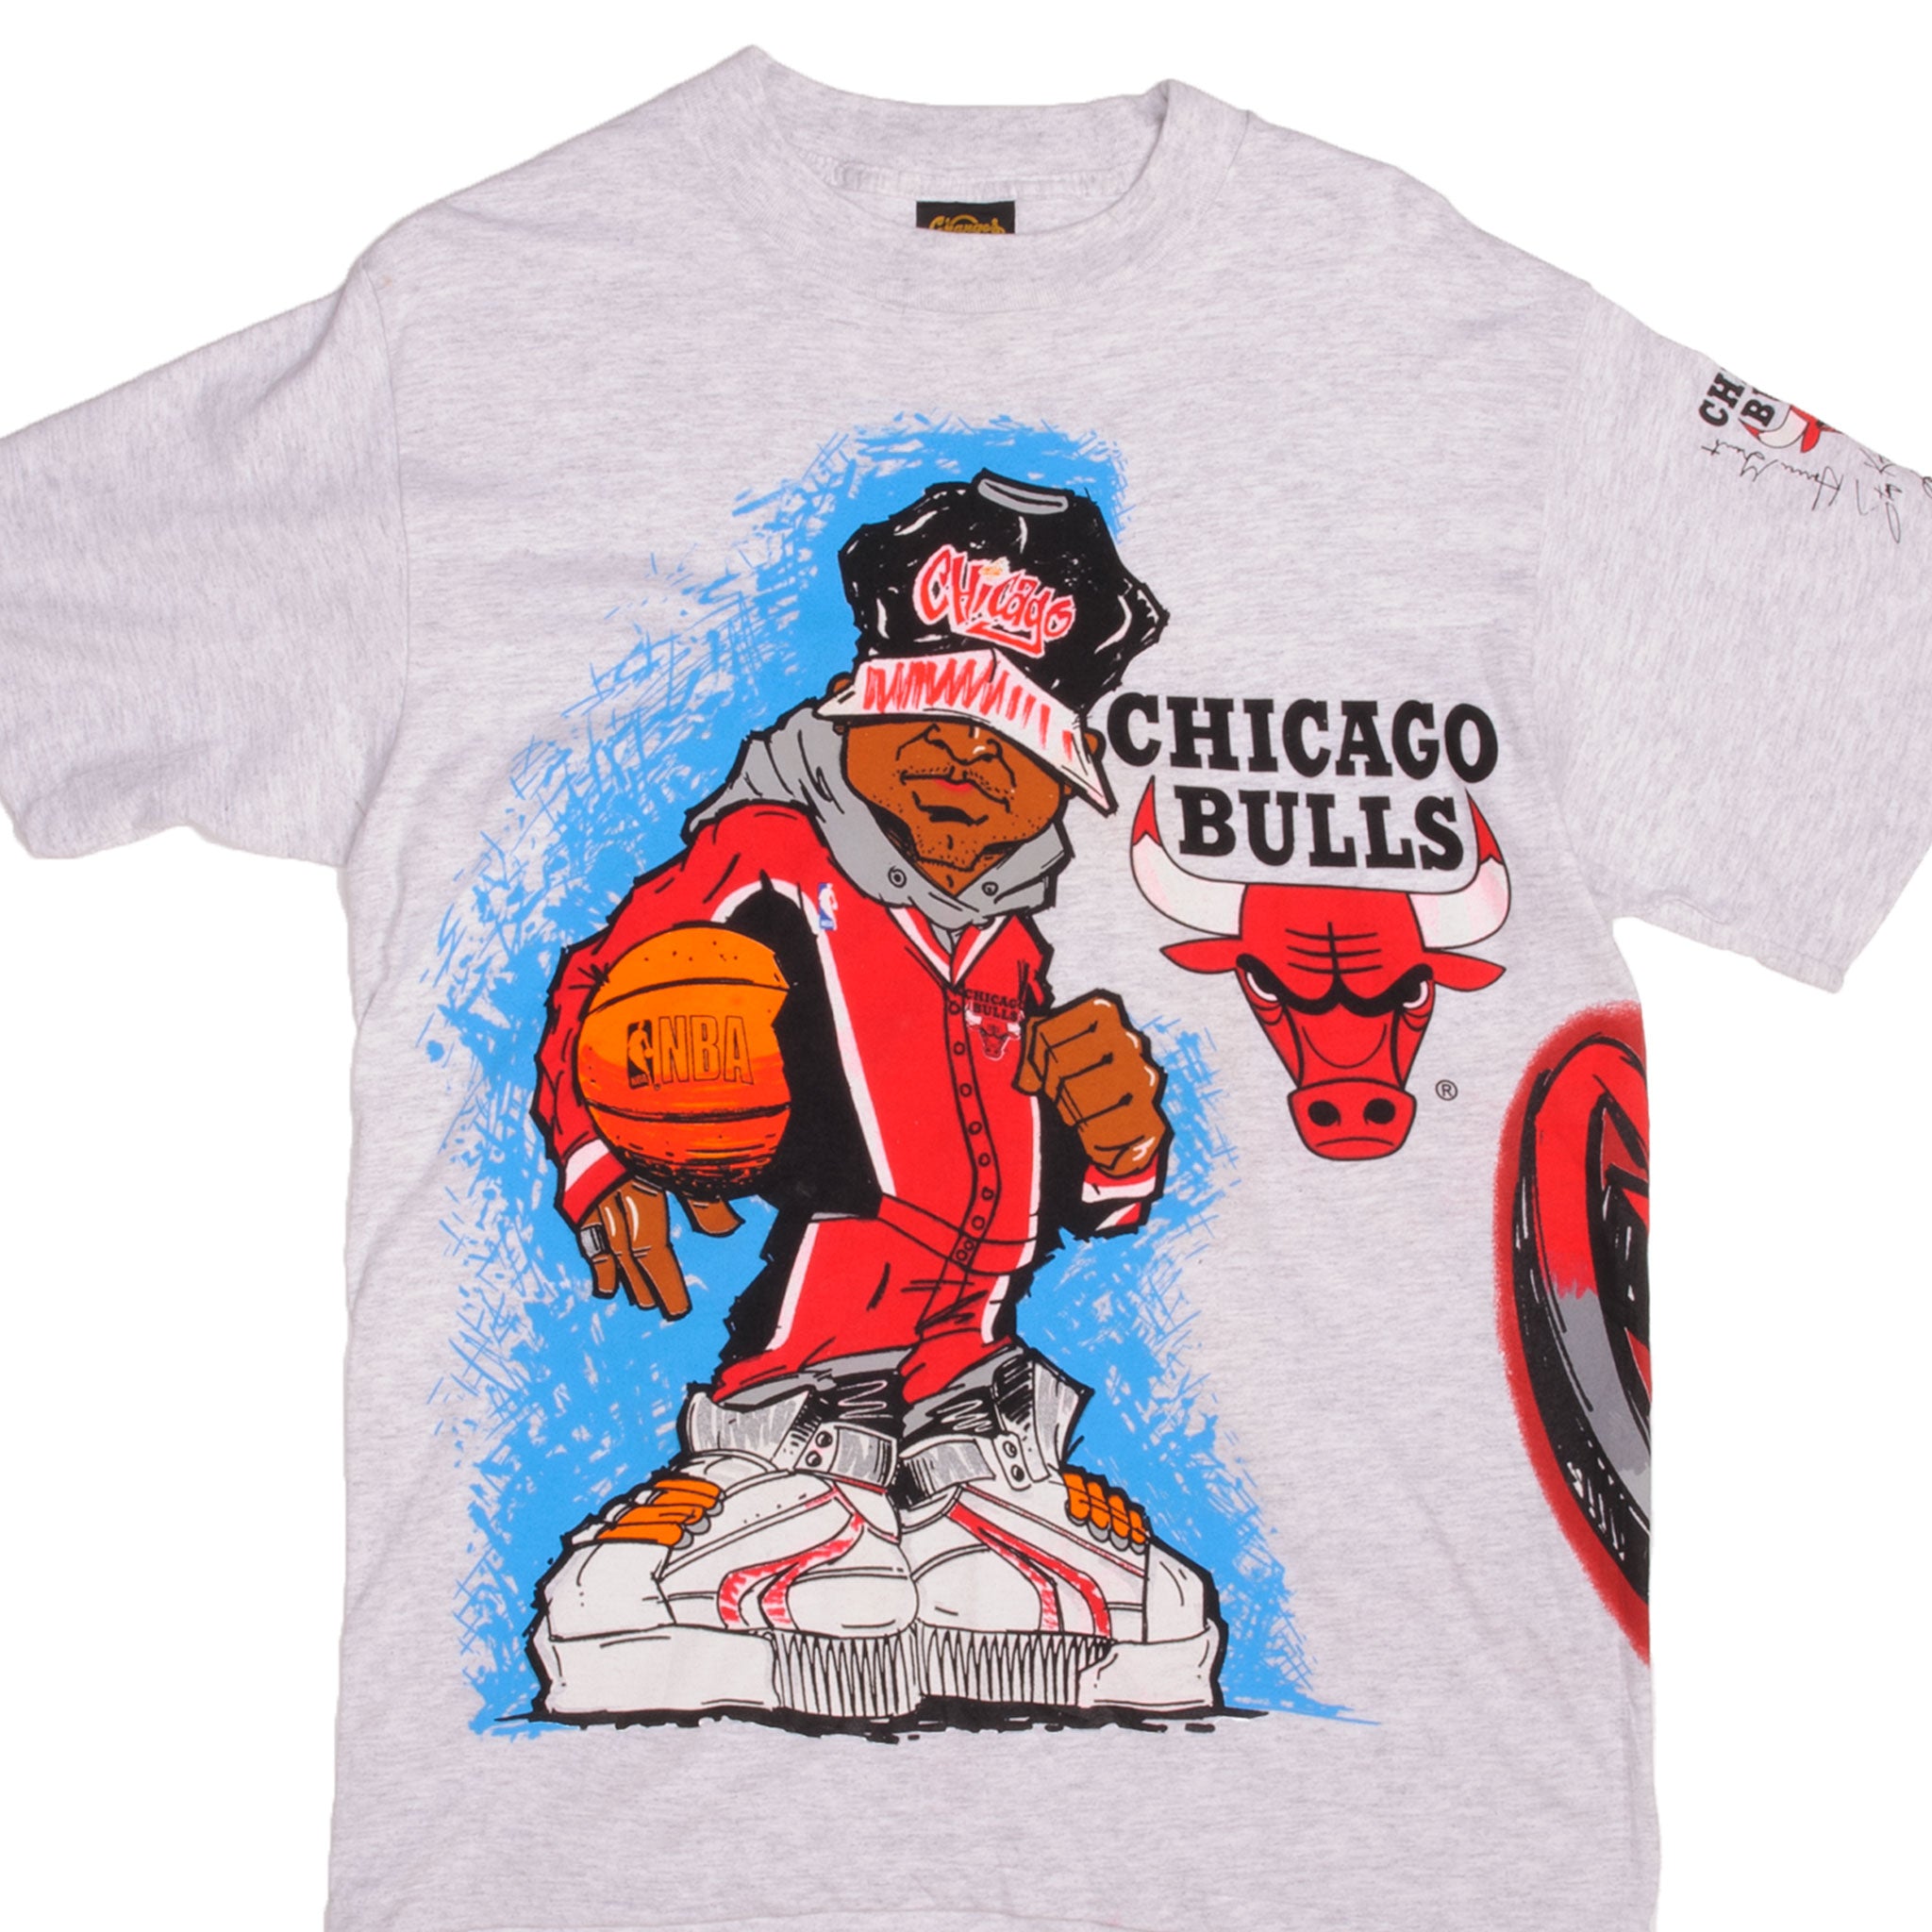 NBA caricature championship shirts over the years